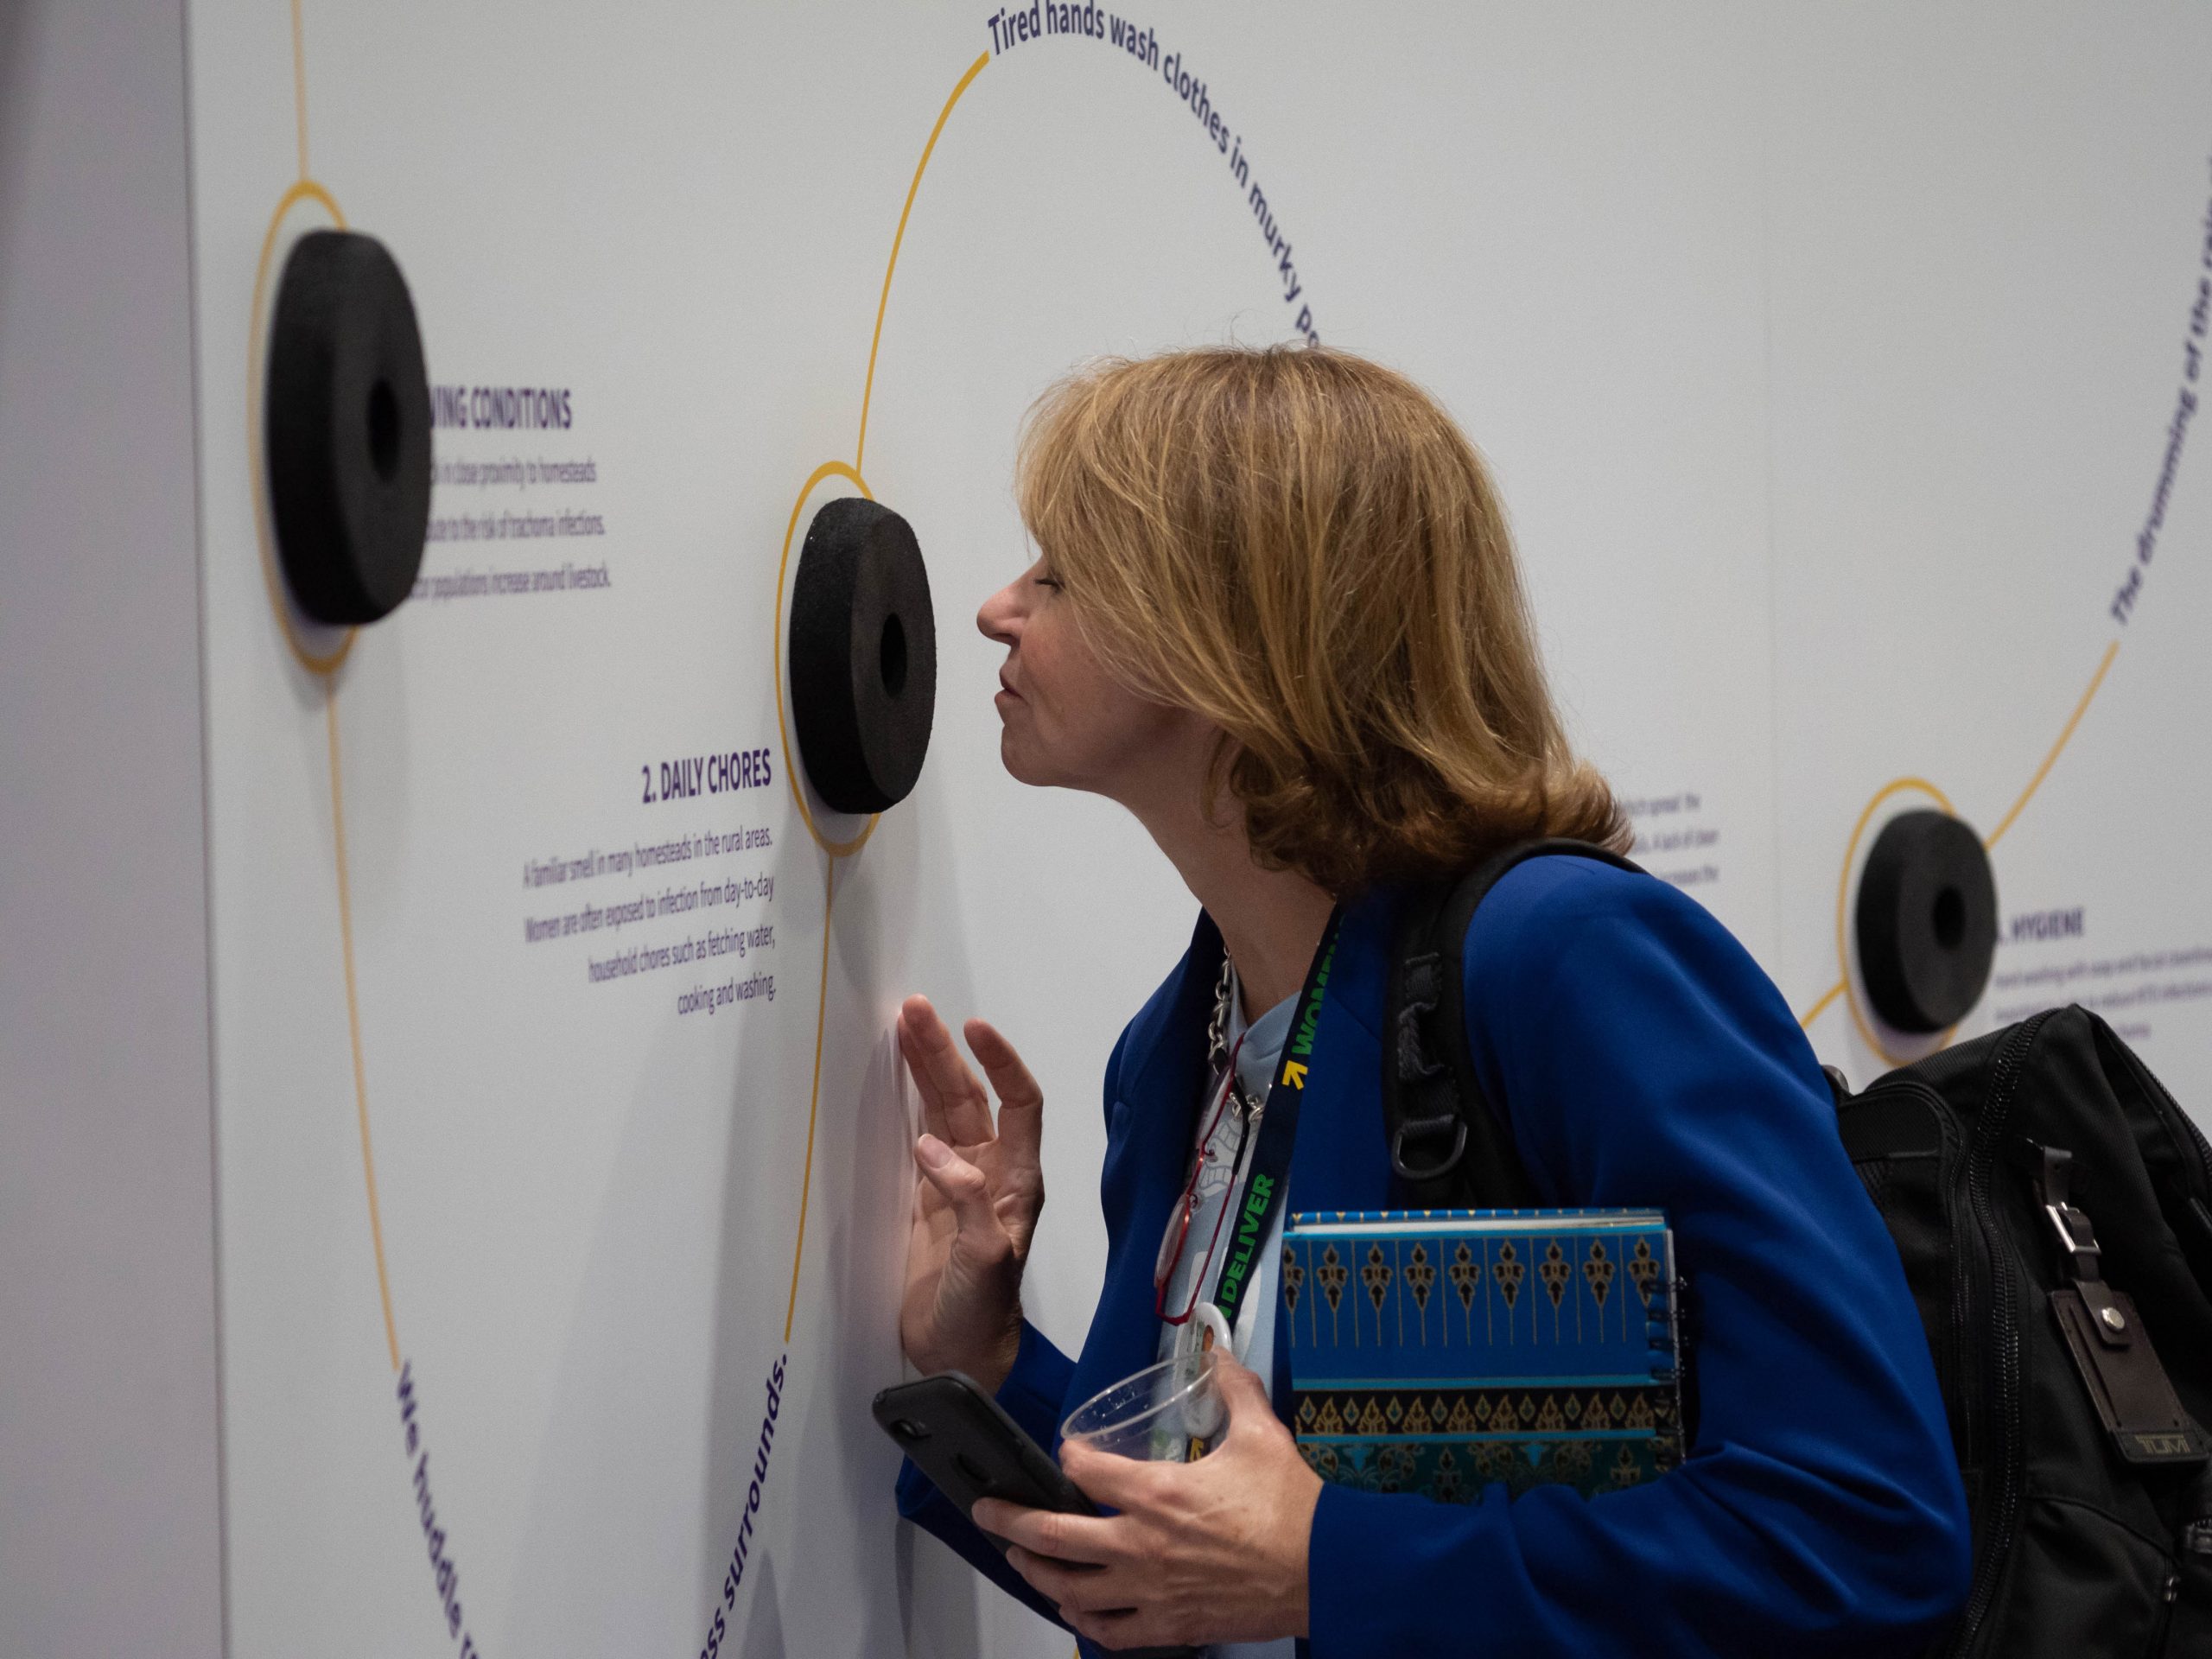 Women Deliver 2019 -image 5 - a woman trying out the interactive exhibition stand